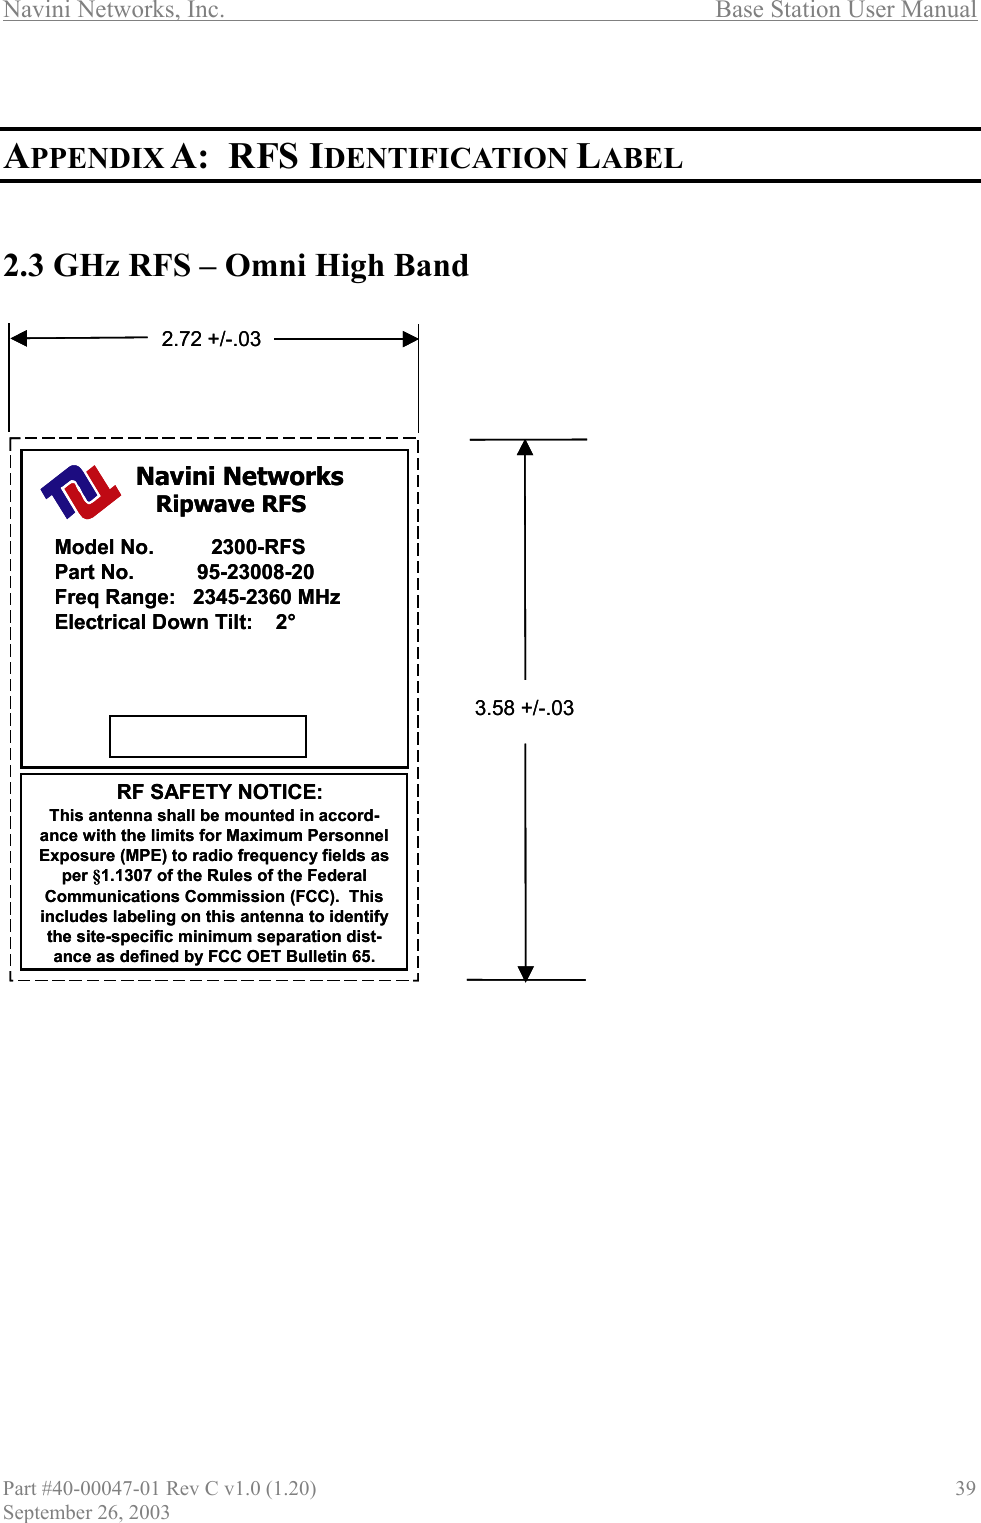 Navini Networks, Inc.                                  Base Station User Manual   APPENDIX A:  RFS IDENTIFICATION LABEL   2.3 GHz RFS – Omni High Band  Ripwave RFSRF SAFETY NOTICE:Model No.          2300-RFSPart No.           95-23008-20Freq Range:   2345-2360 MHzElectrical Down Tilt:    2°Navini Networks2.72 +/-.033.58 +/-.03This antenna shall be mounted in accord-ance with the limits for Maximum Personnel Exposure (MPE) to radio frequency fields asper §1.1307 of the Rules of the Federal Communications Commission (FCC).  This includes labeling on this antenna to identifythe site-specific minimum separation dist-ance as defined by FCC OET Bulletin 65.Ripwave RFSRF SAFETY NOTICE:Model No.          2300-RFSPart No.           95-23008-20Freq Range:   2345-2360 MHzElectrical Down Tilt:    2°Navini Networks2.72 +/-.033.58 +/-.03This antenna shall be mounted in accord-ance with the limits for Maximum Personnel Exposure (MPE) to radio frequency fields asper §1.1307 of the Rules of the Federal Communications Commission (FCC).  This includes labeling on this antenna to identifythe site-specific minimum separation dist-ance as defined by FCC OET Bulletin 65.            Part #40-00047-01 Rev C v1.0 (1.20)                               39 September 26, 2003 